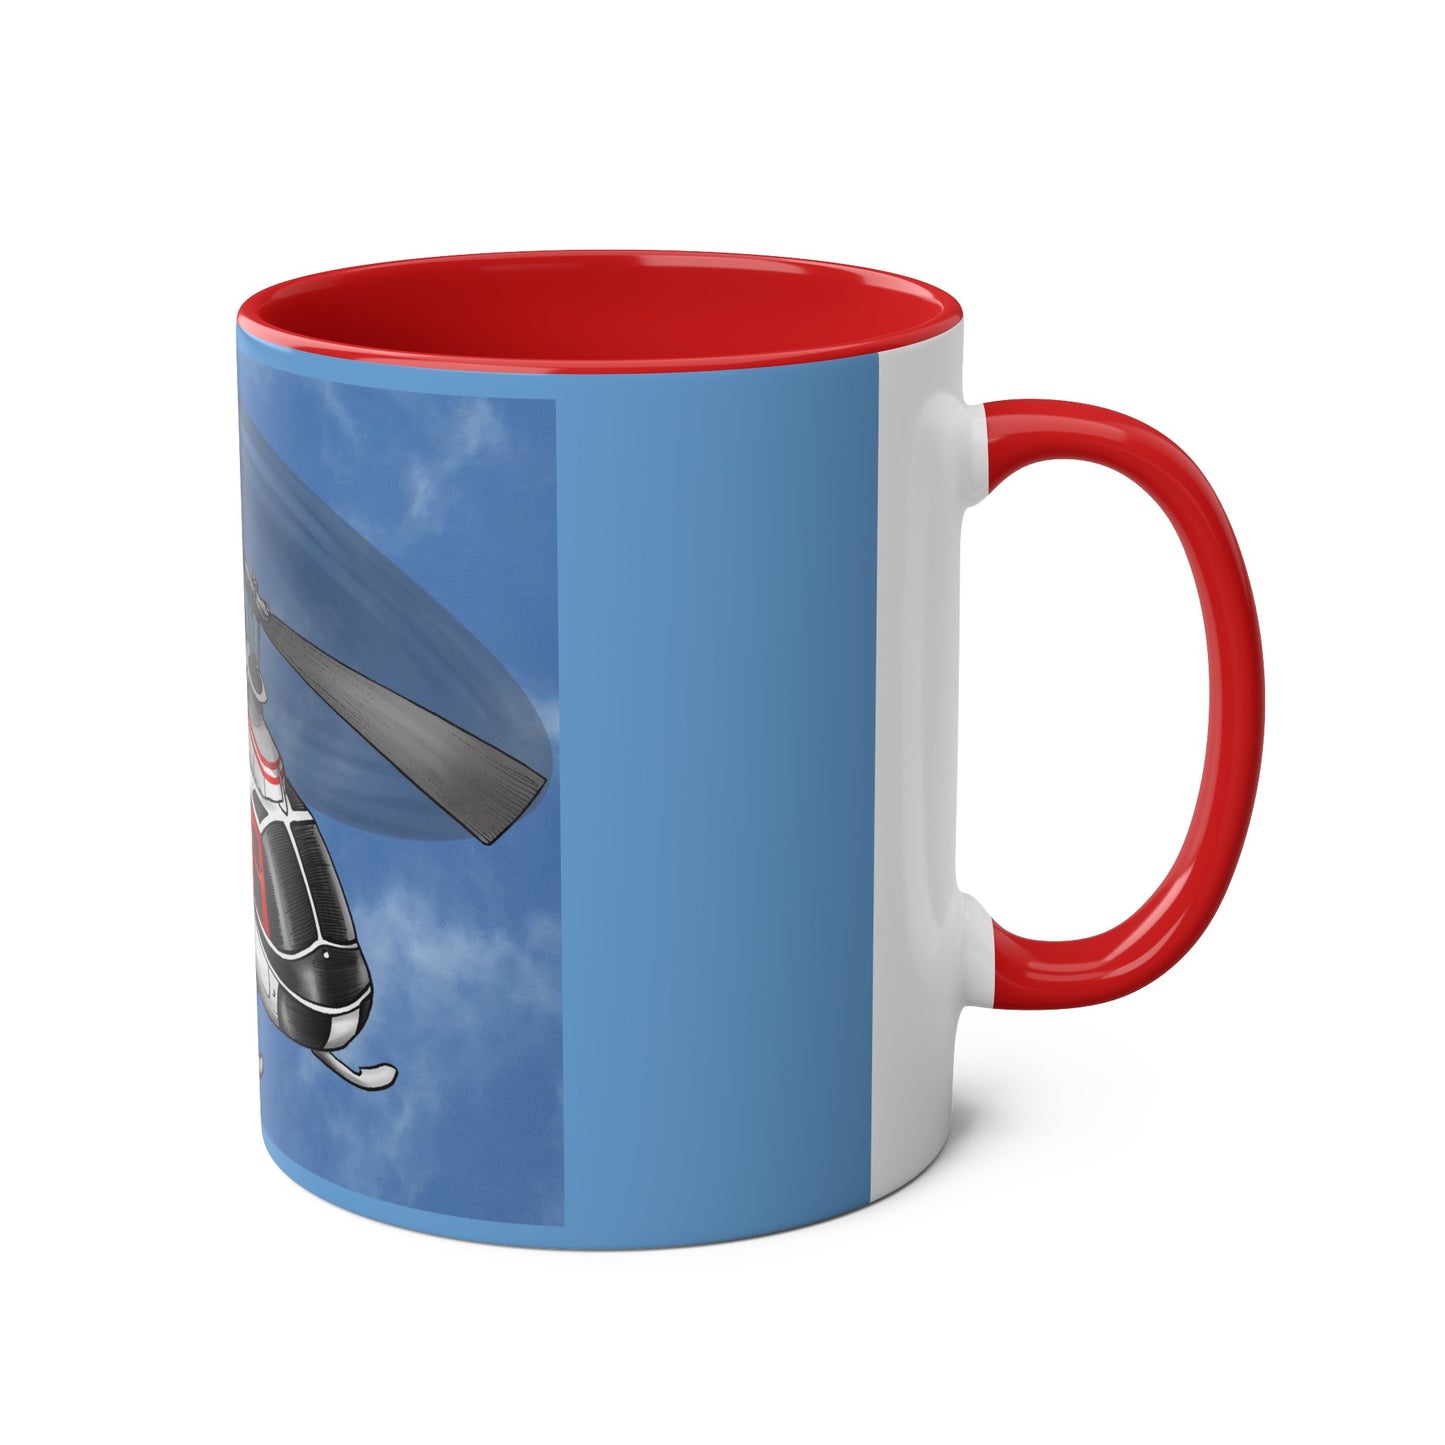 Bell Jet Ranger Helicopter Two-Tone Coffee Mugs, 11oz